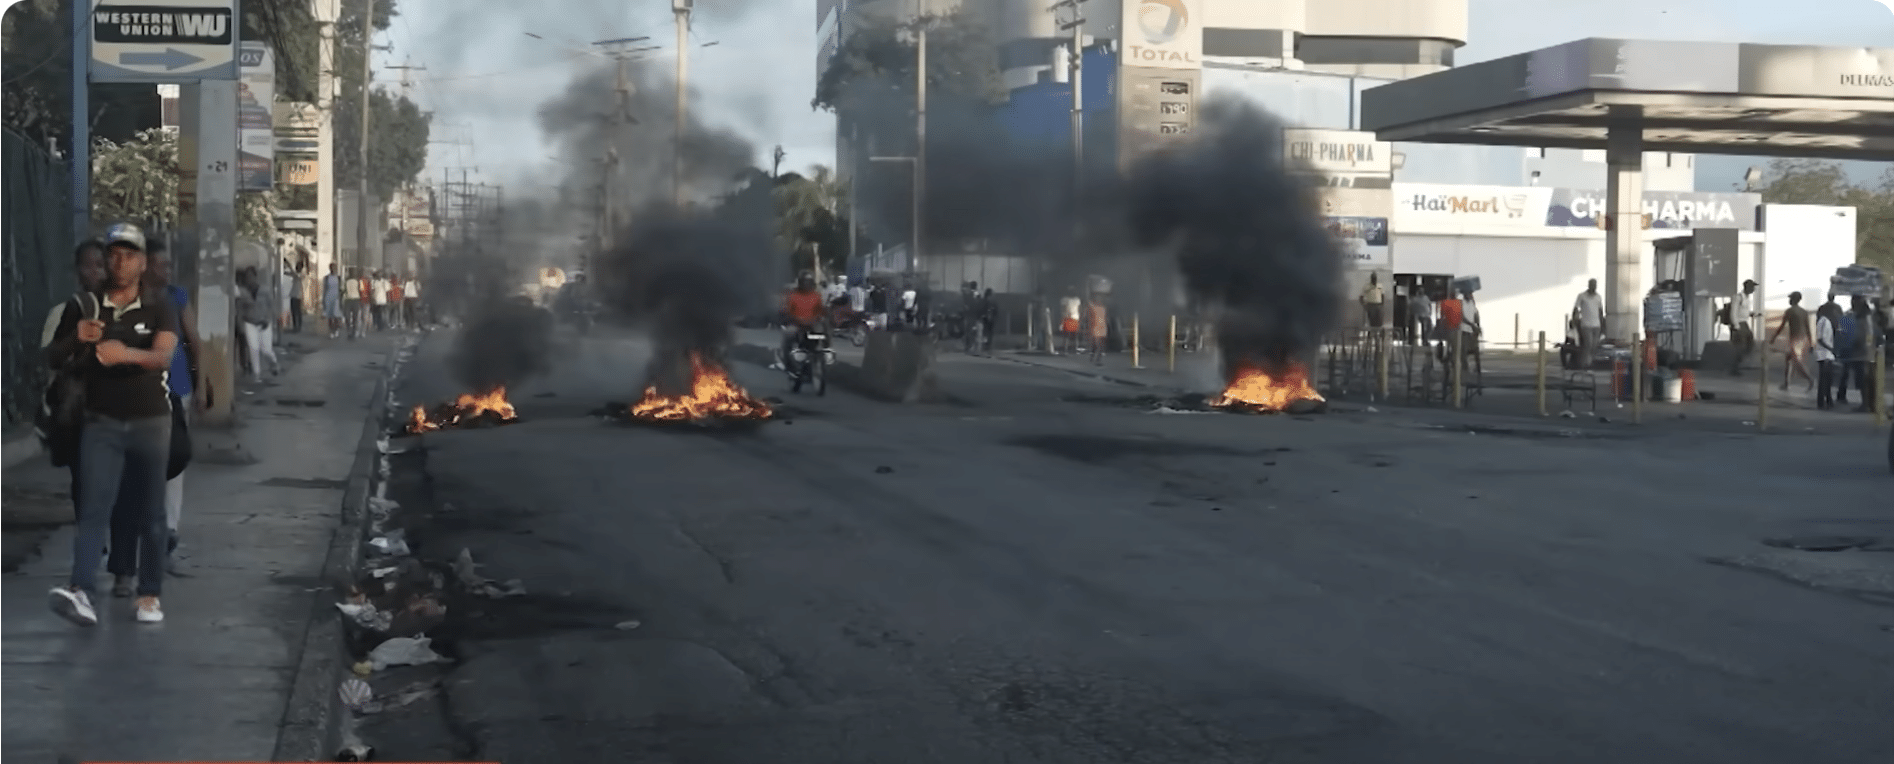 UPDATE: Haiti descends into chaos as bodies are seen littering the streets